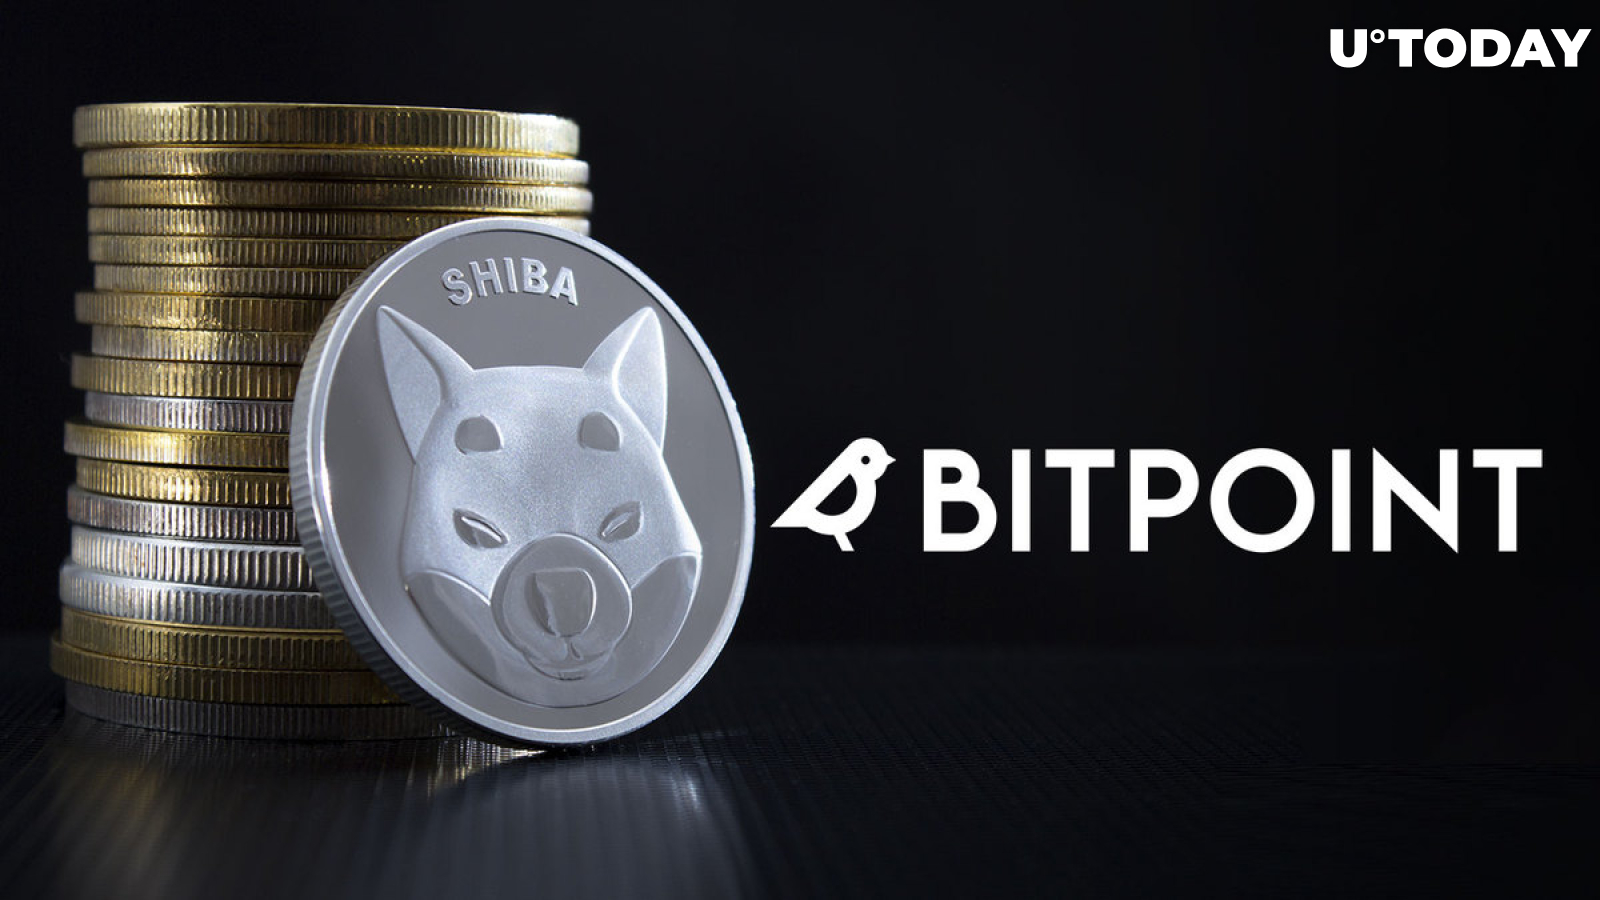 Millions of SHIB to Be Gifted During Listing on Major Japanese Crypto Exchange